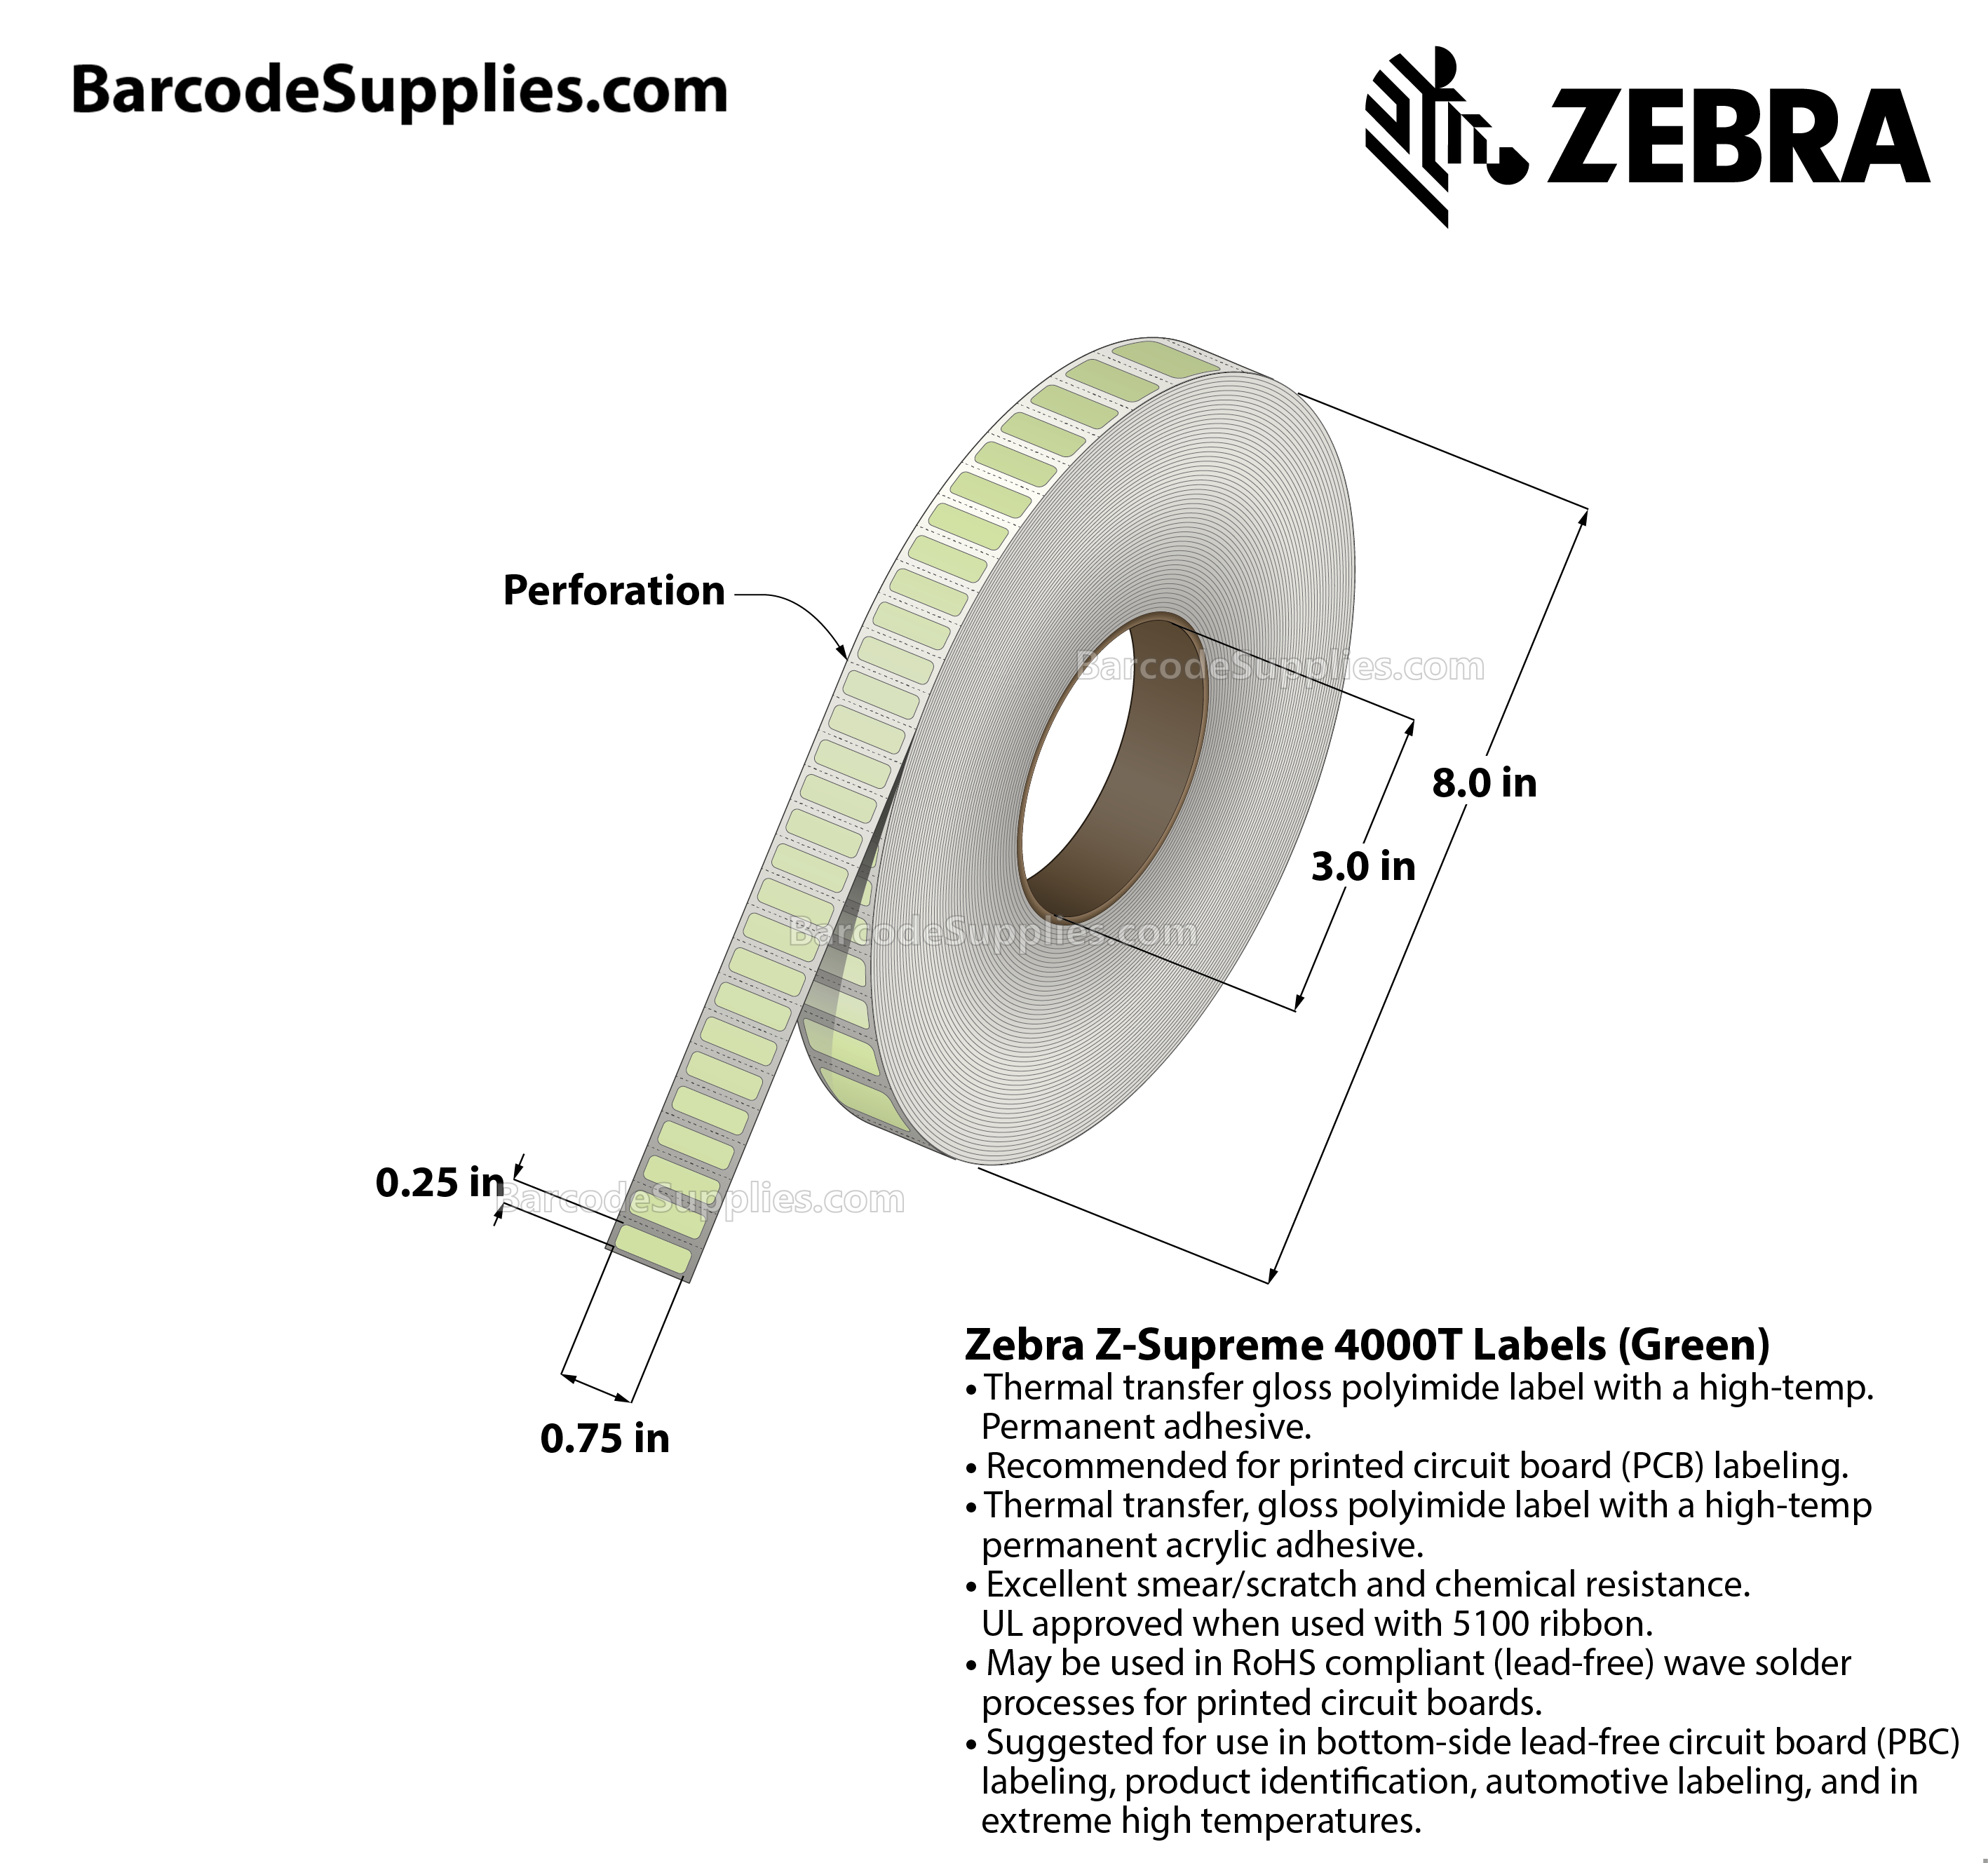 0.75 x 0.25 Thermal Transfer Green Z-Supreme 4000T Green Labels With High-temp Adhesive - Perforated - 10000 Labels Per Roll - Carton Of 1 Rolls - 10000 Labels Total - MPN: 10023312